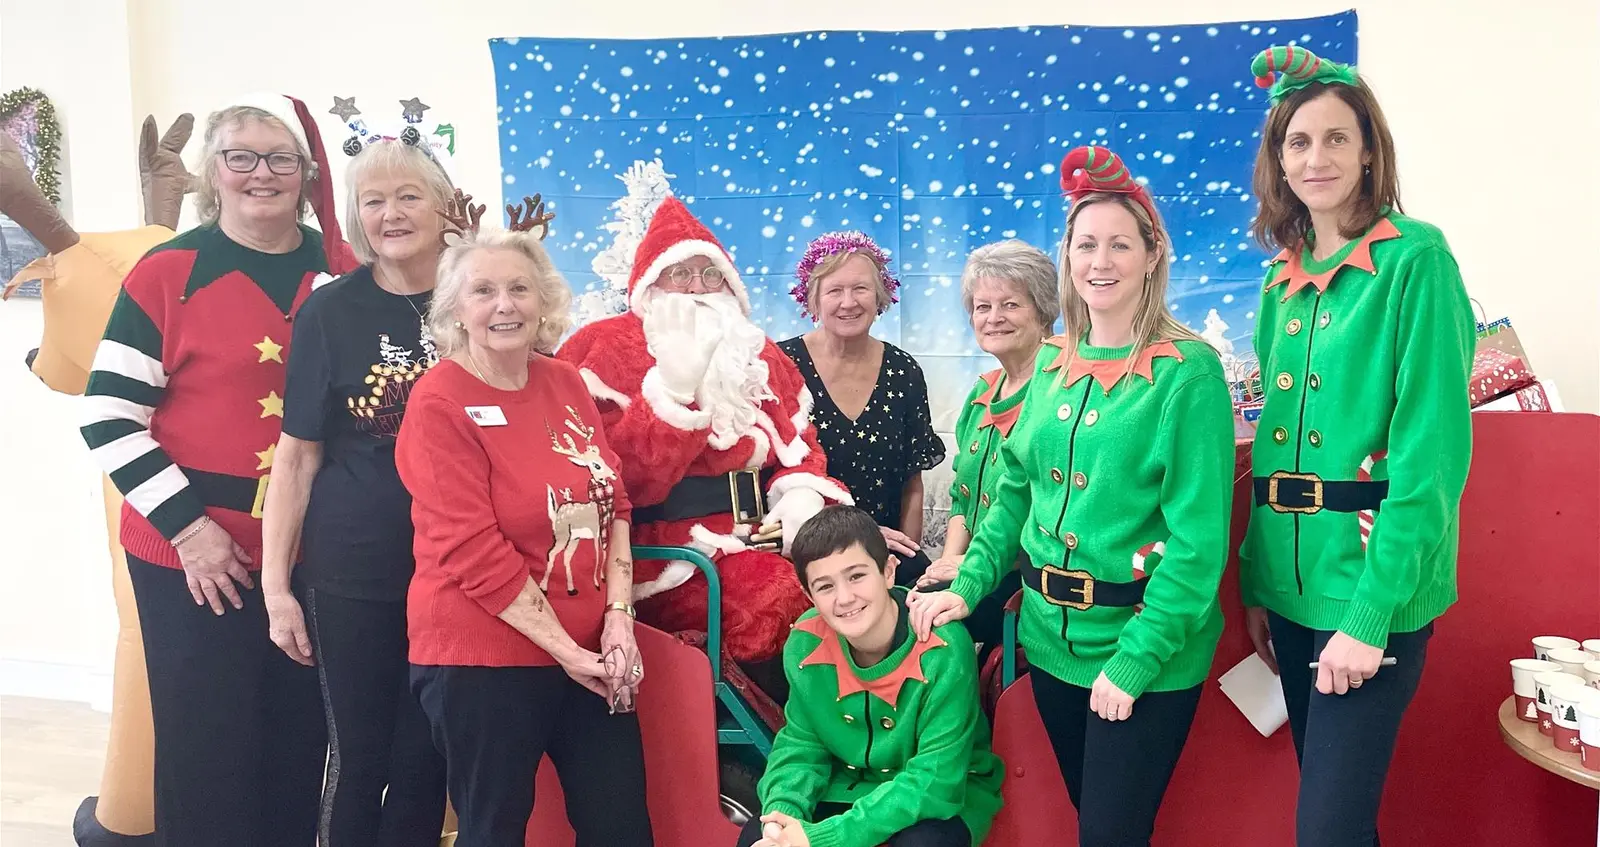 Galanos House care home staff at Breakfast with Santa Event